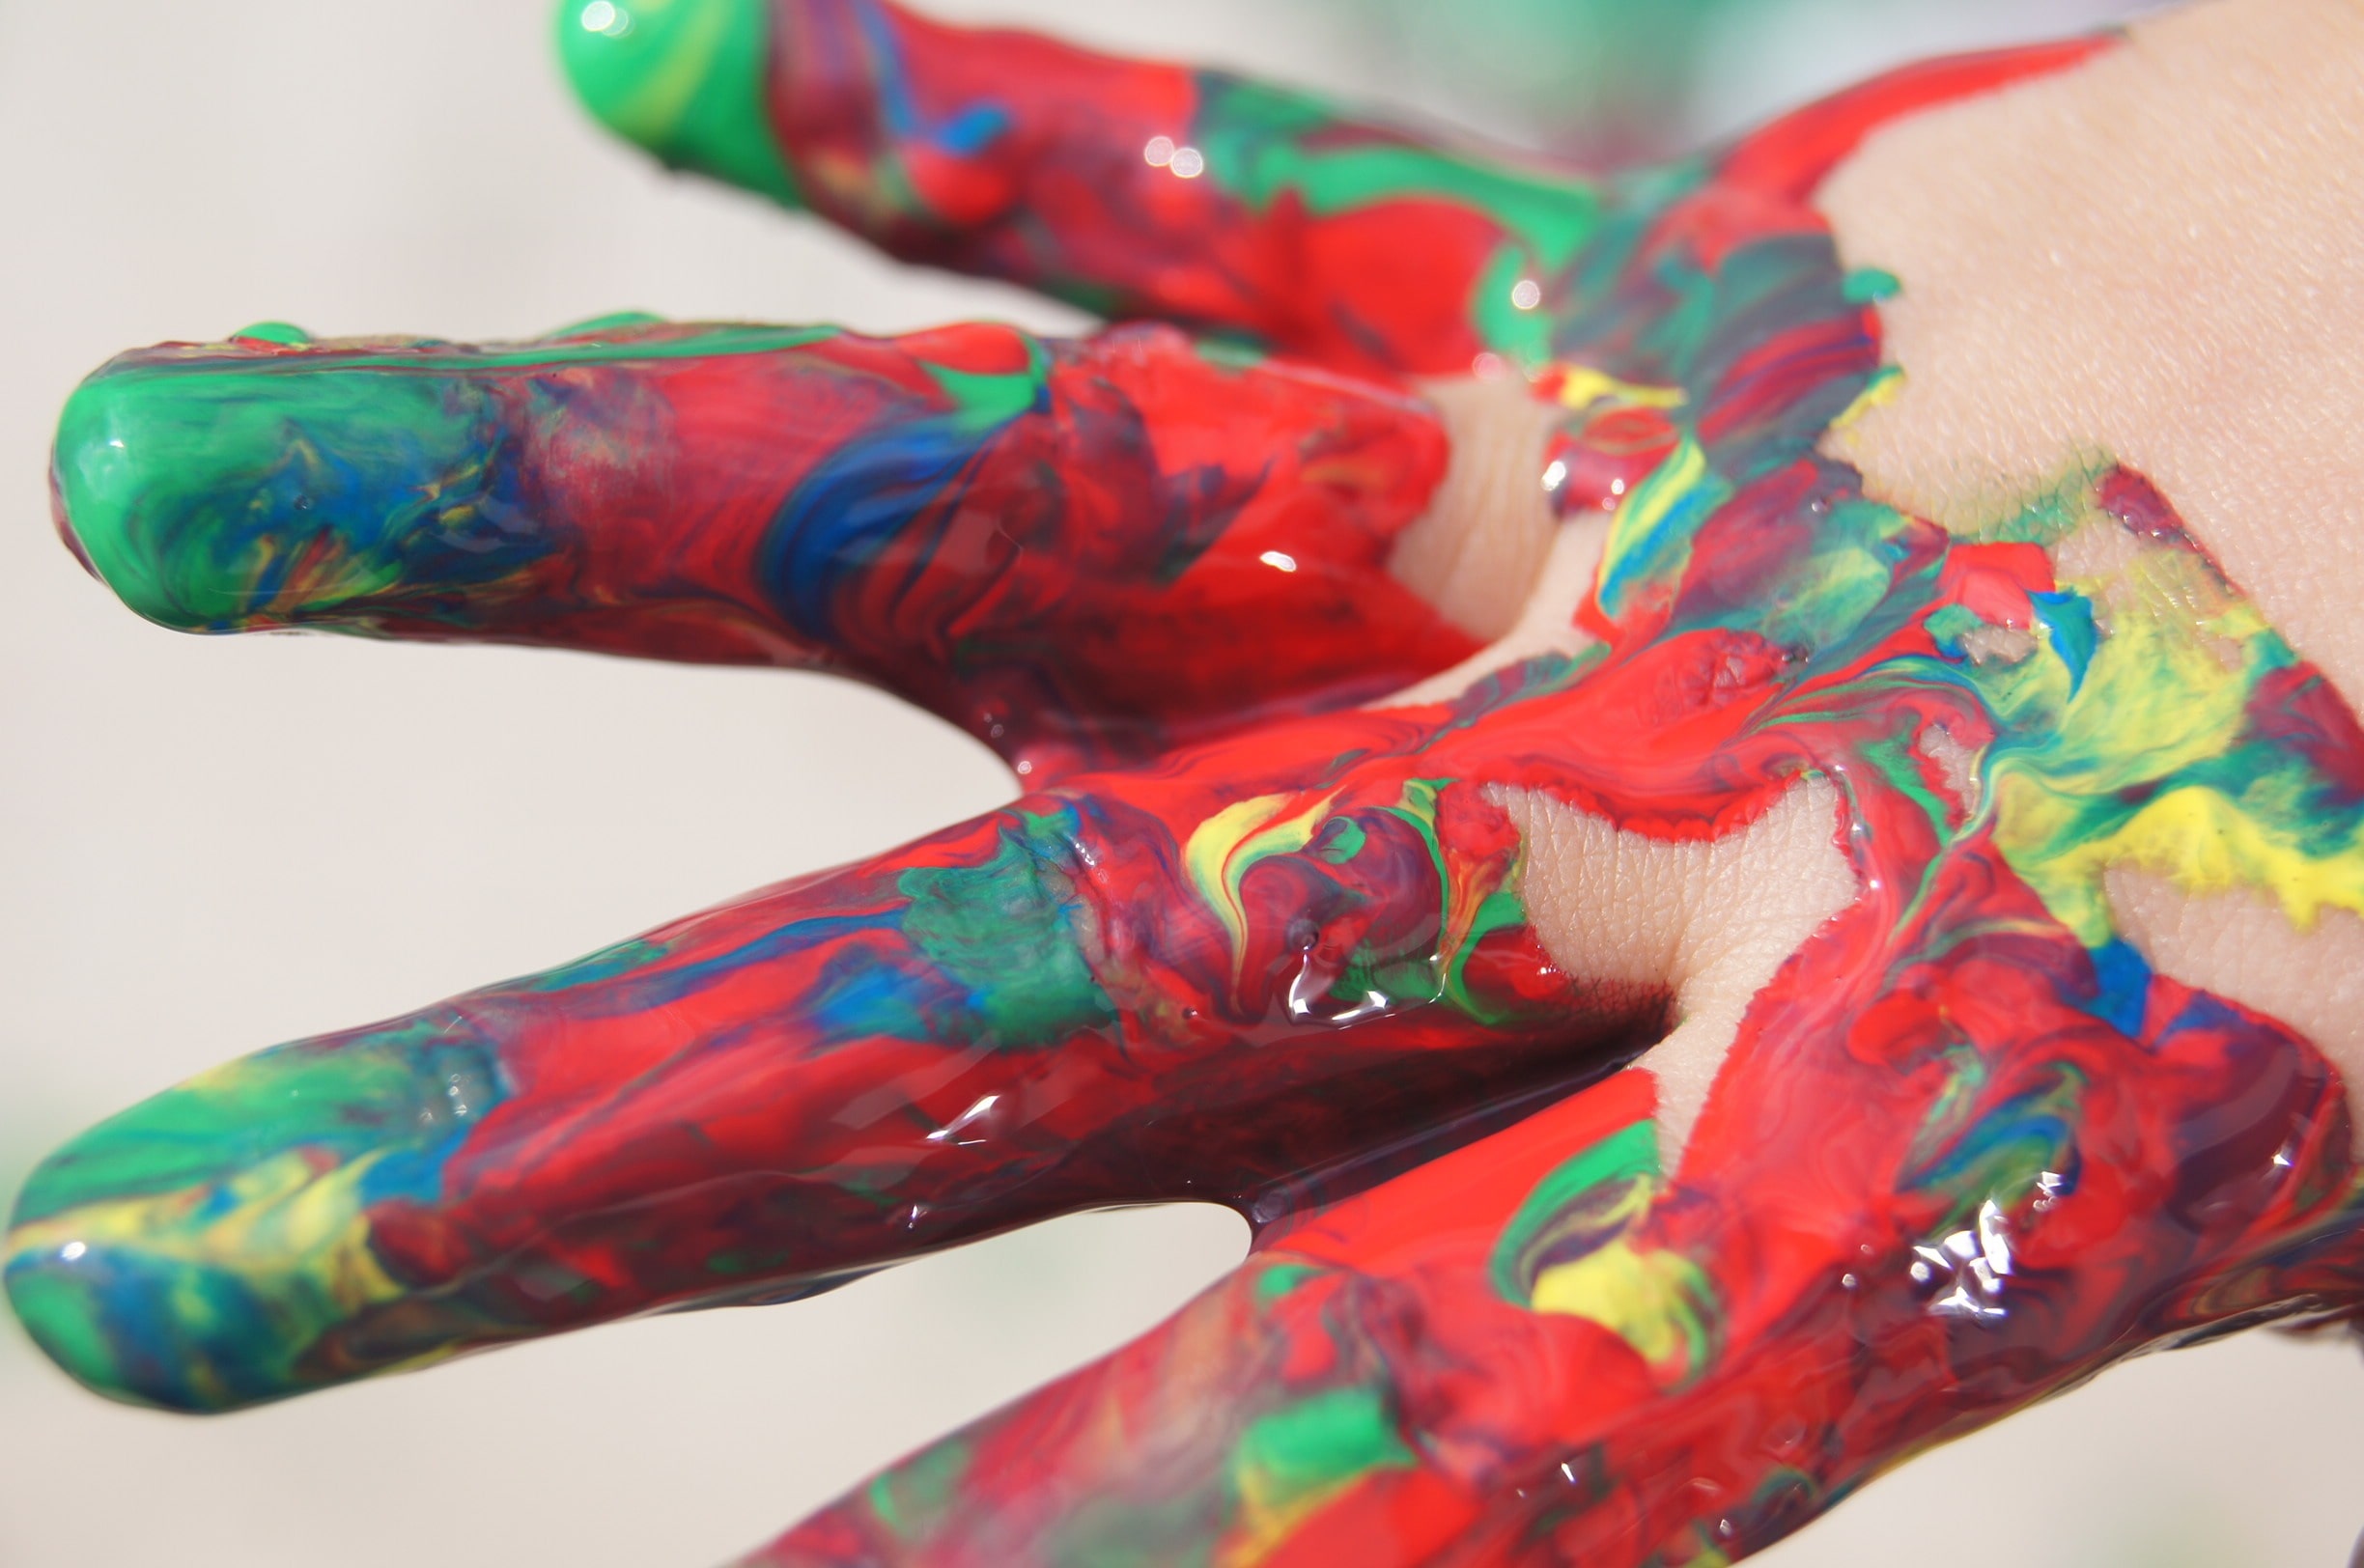 child's hands covered in paint